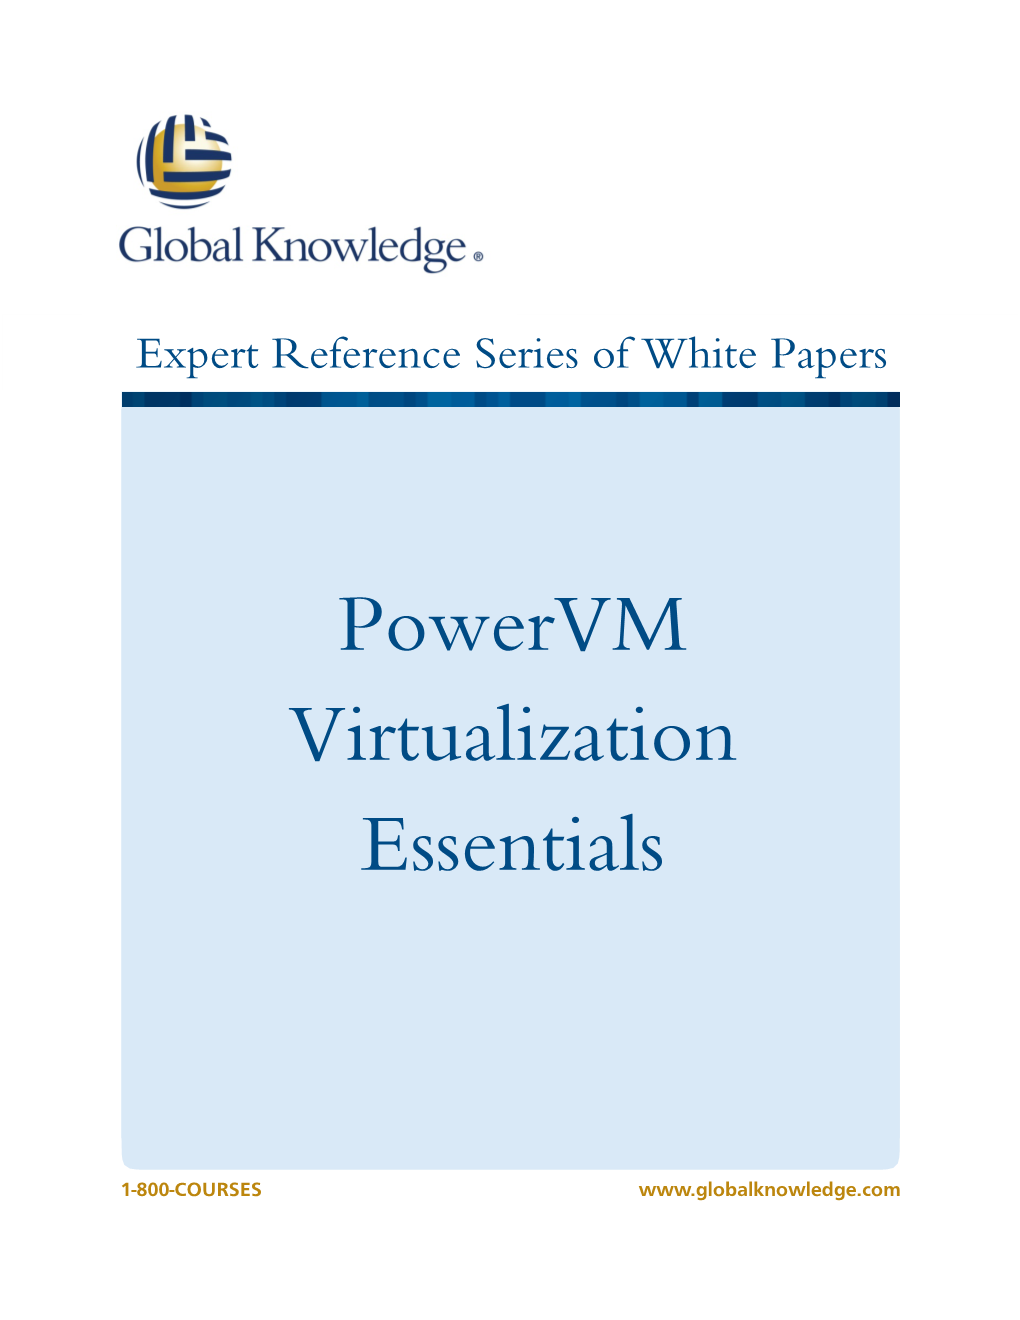 Powervm Virtualization Essentials Iain Campbell, UNIX/Linux Open Systems Architect, Elearning Specialist